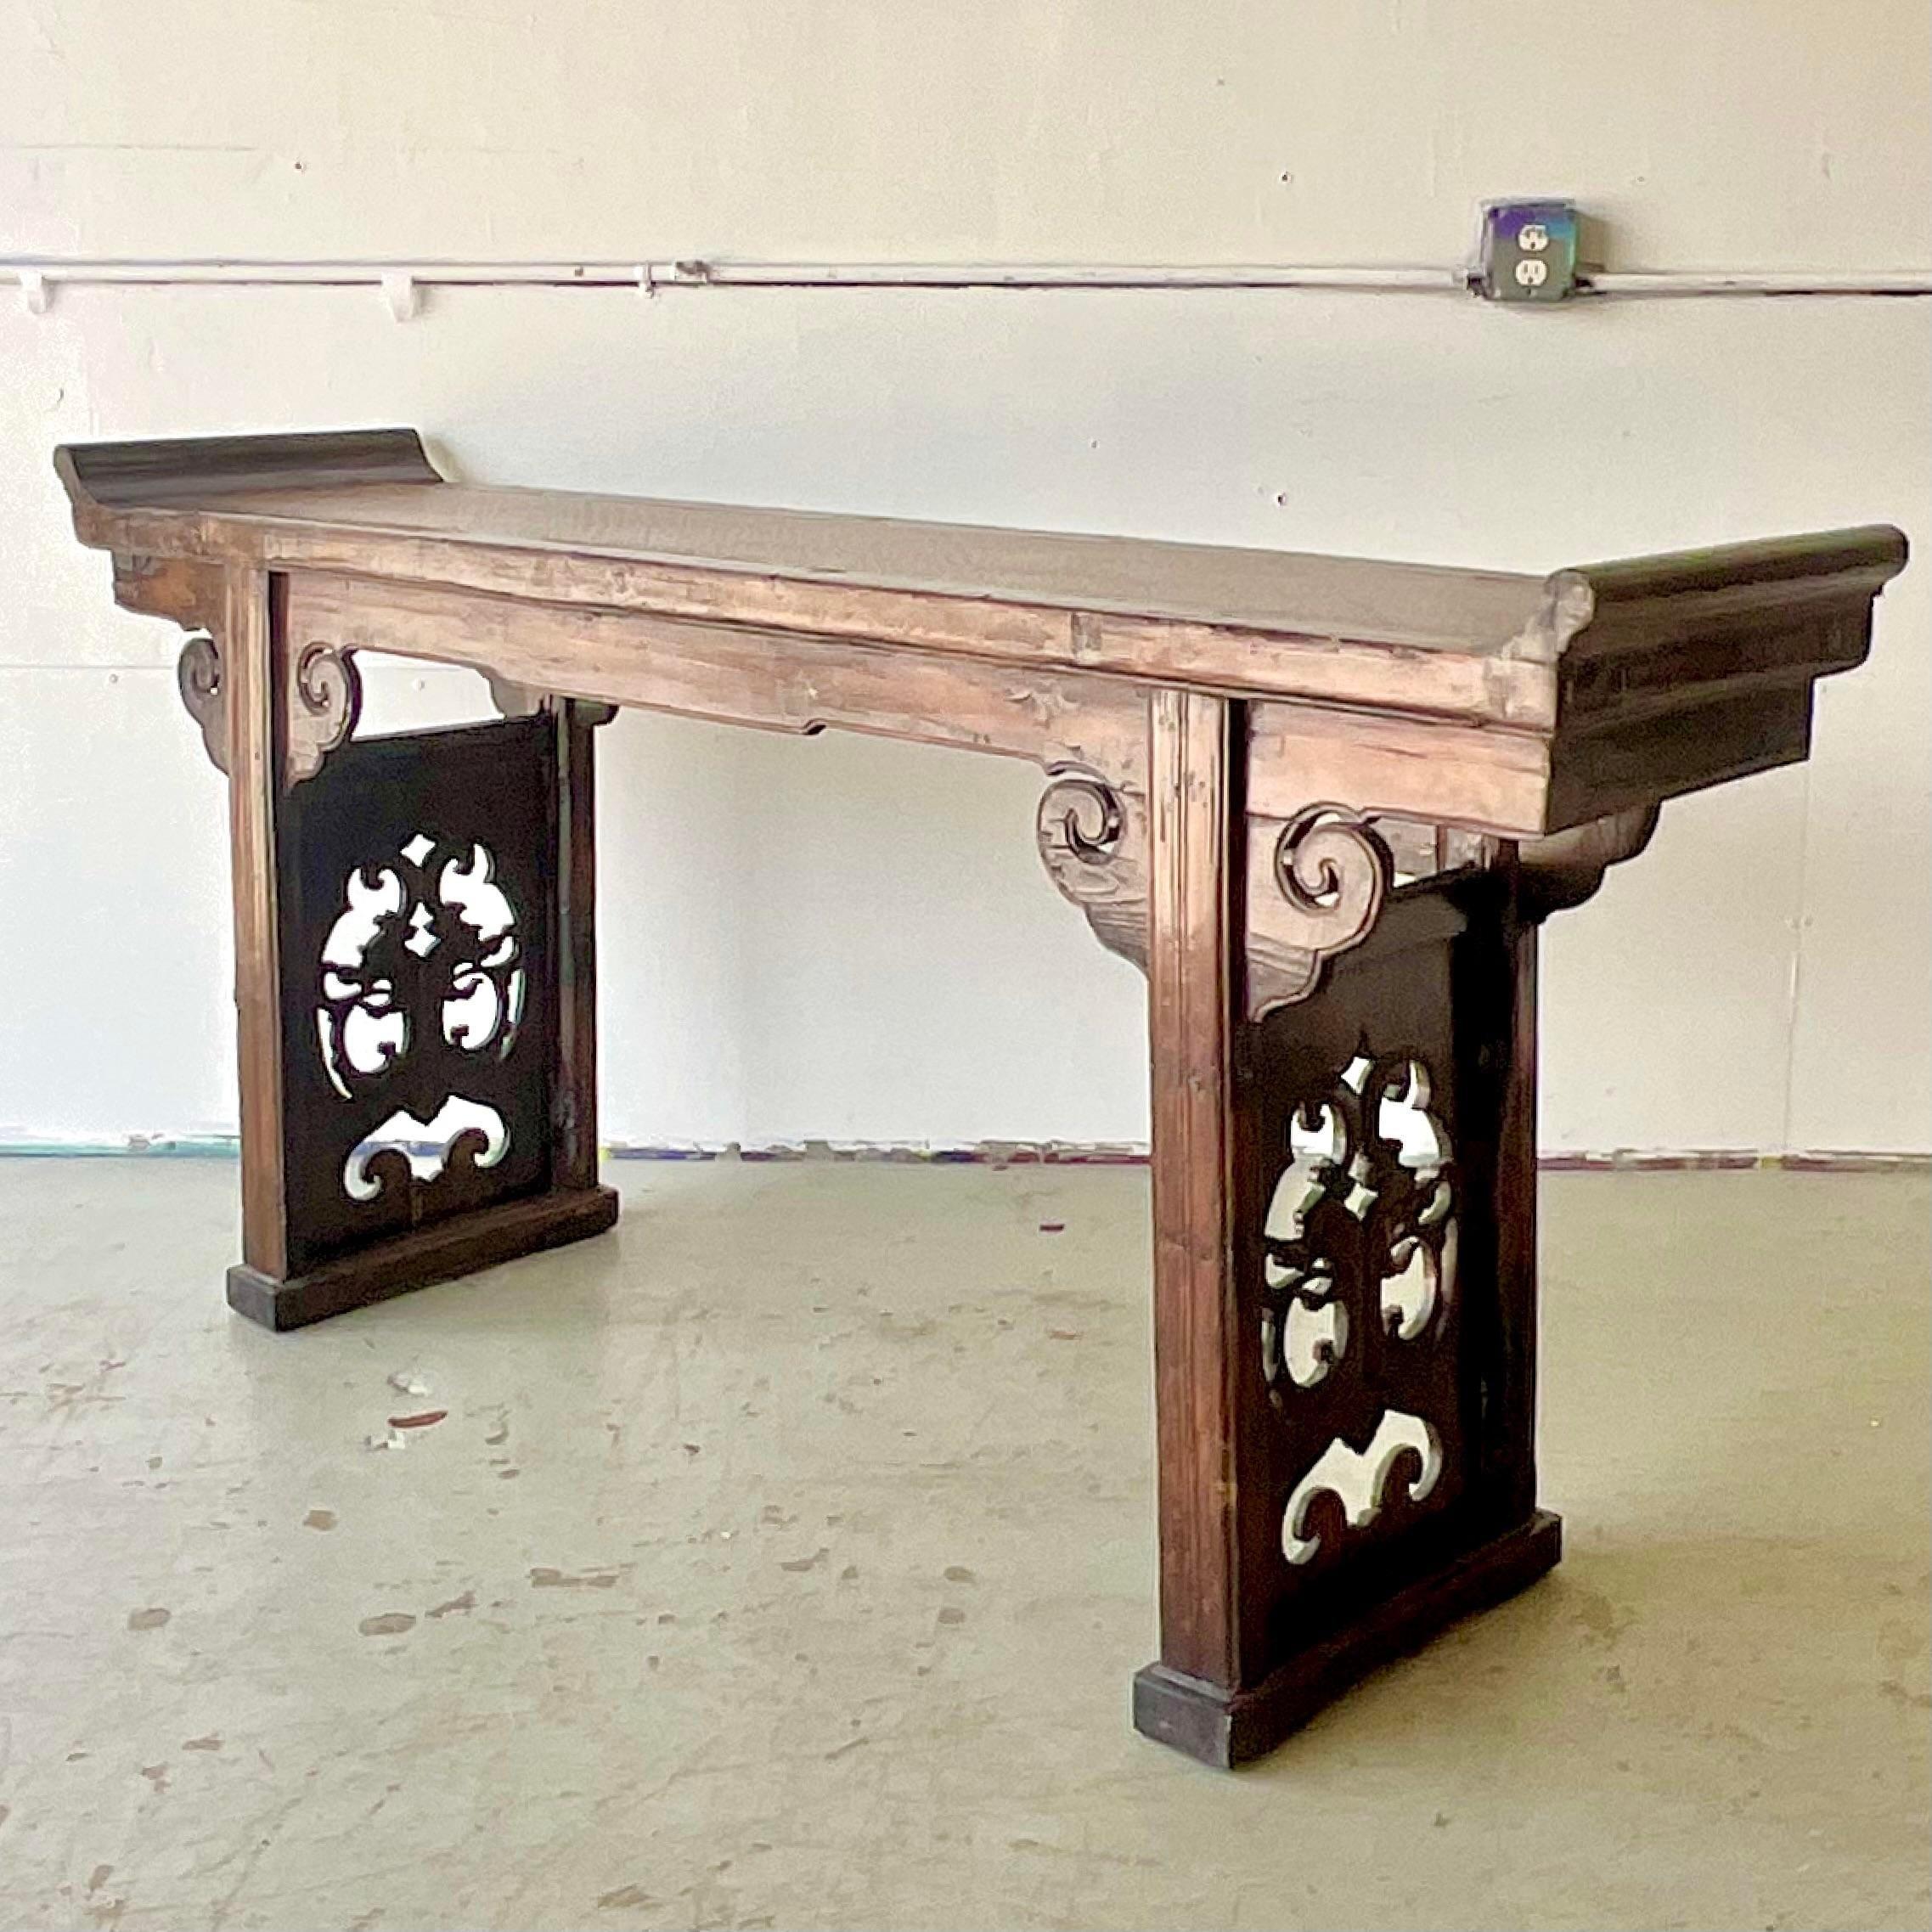 A fantastic vintage Asian console table. A chic pagoda wing design with a classic altar shape. Acquired from a Palm Beach estate.